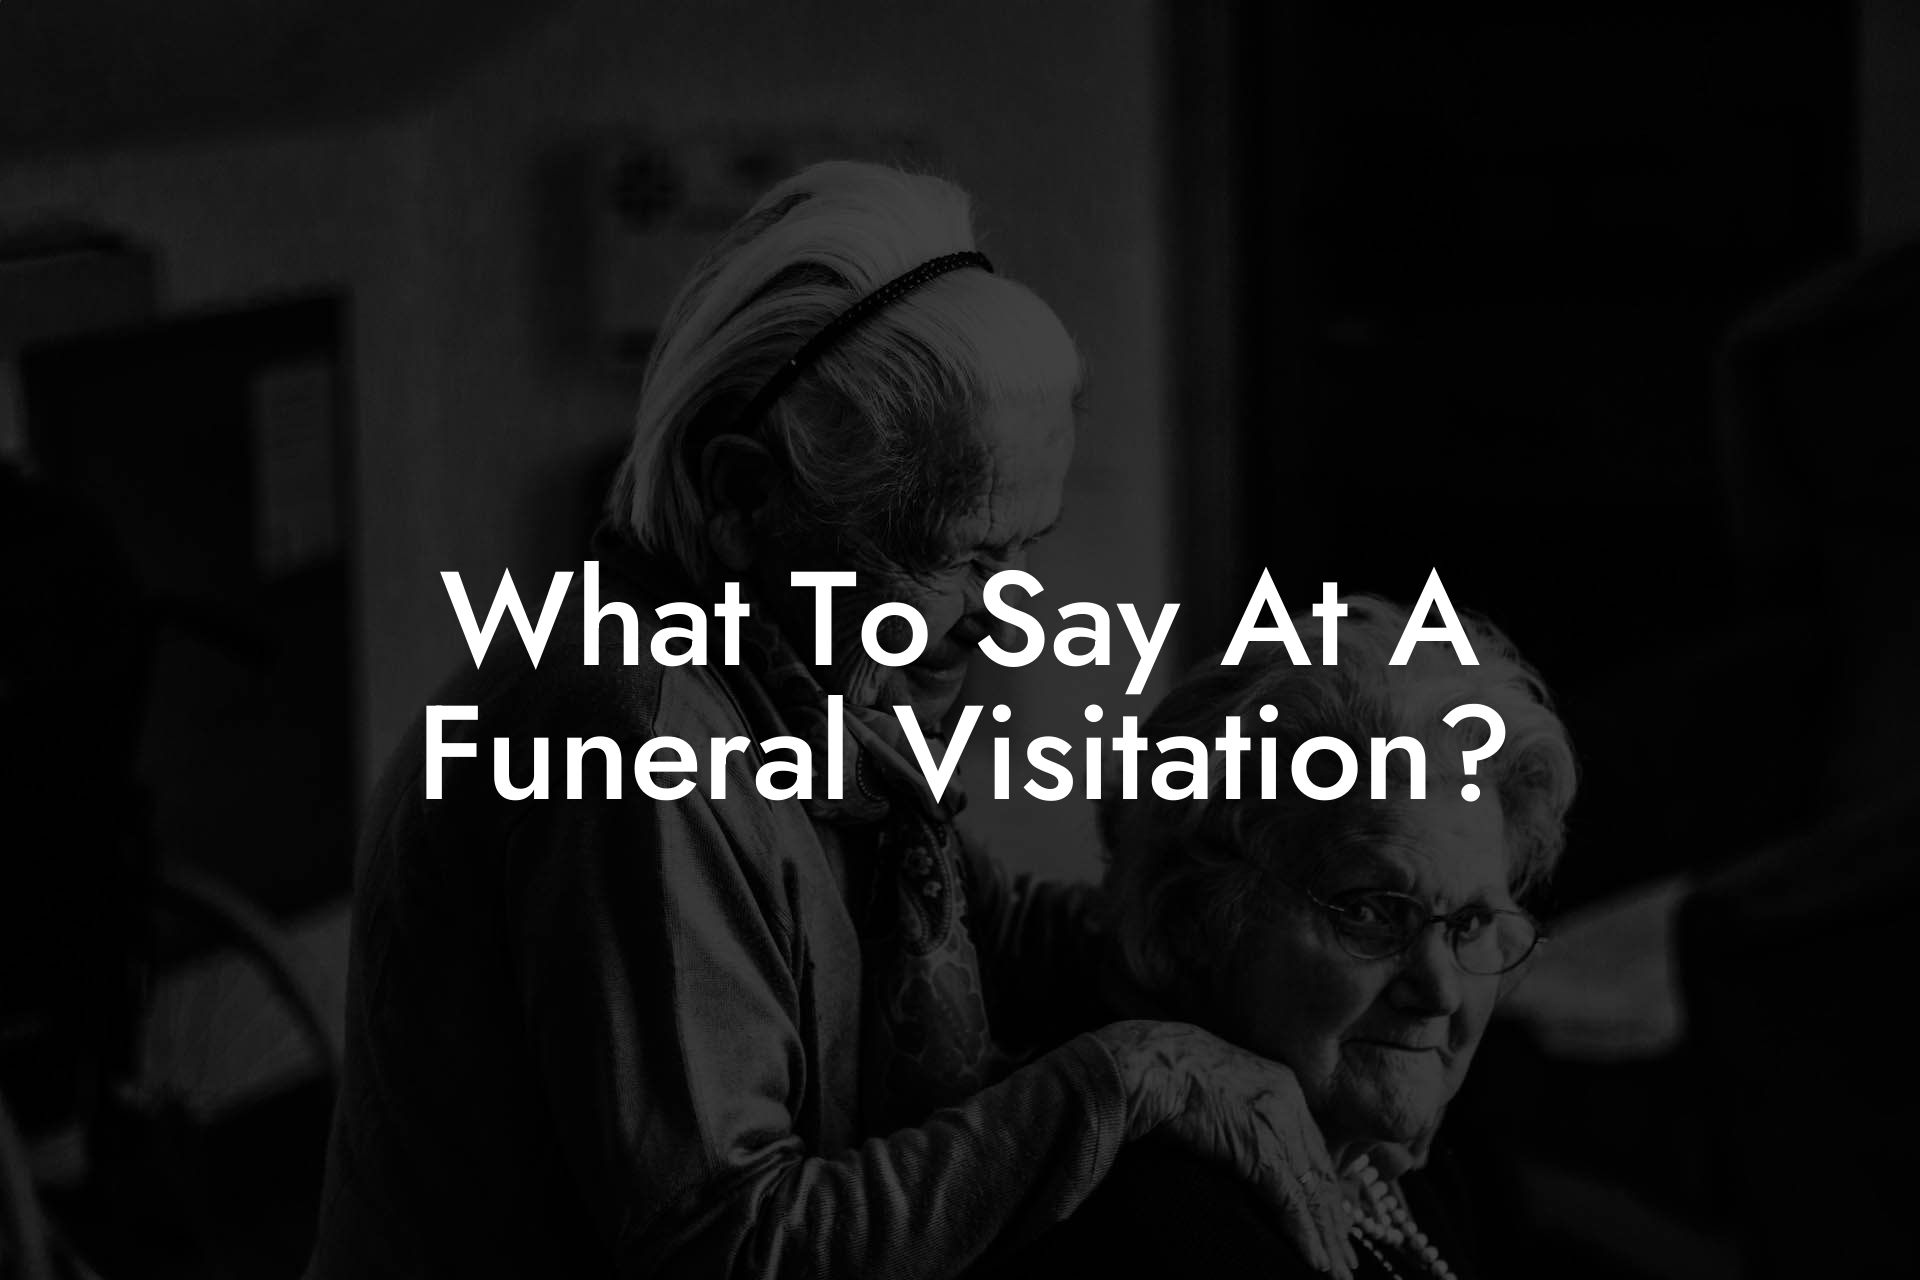 What To Say At A Funeral Visitation?